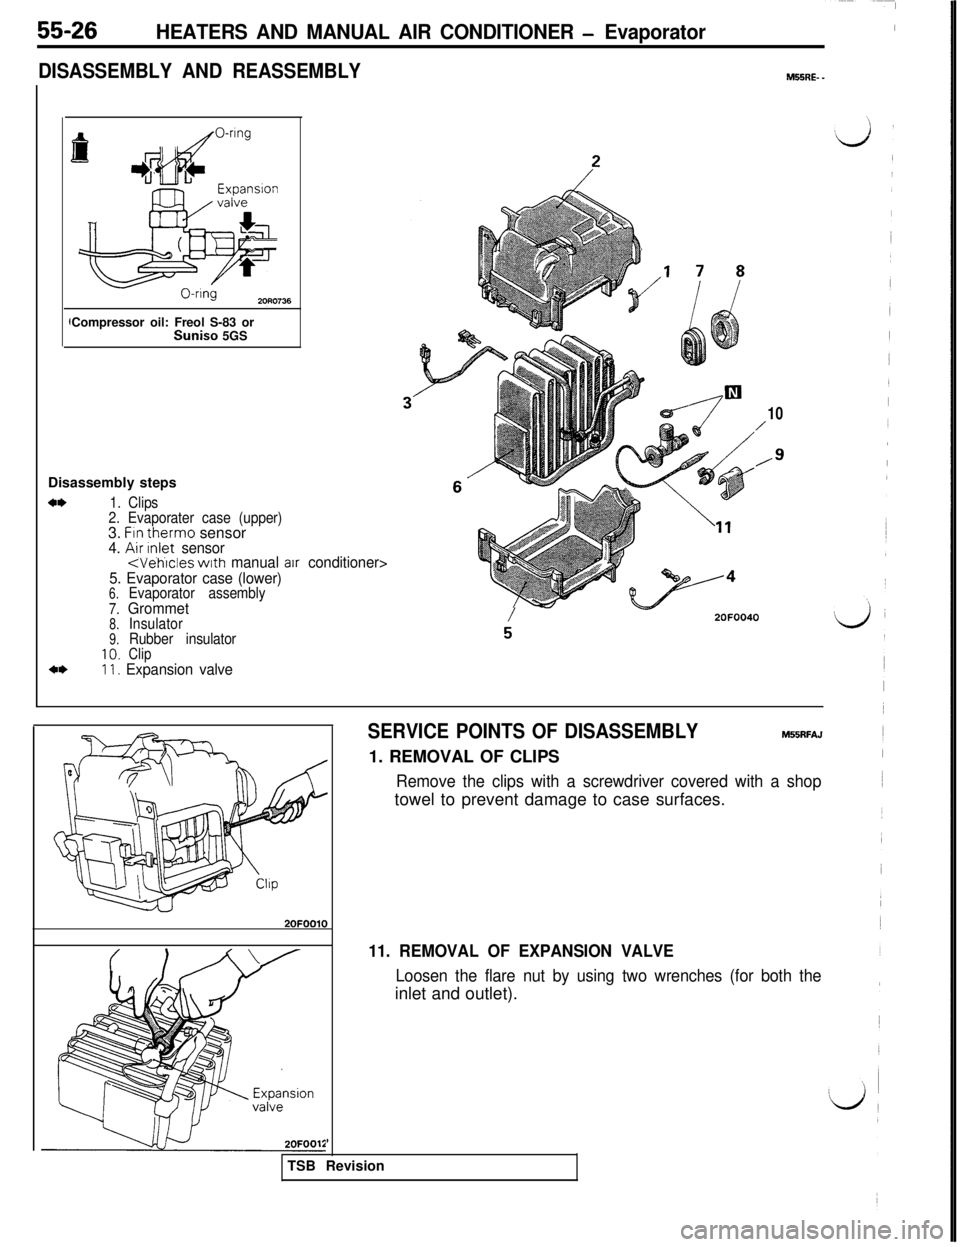 MITSUBISHI 3000GT 1991  Service Manual 55-26HEATERS AND MANUAL AIR CONDITIONER - Evaporator
DISASSEMBLY AND REASSEMBLYM55RE- -Compressor oil: Freol S-83 or
Suniso 5GS
Disassembly steps
4*1. Clips
2. Evaporater case (upper)3. 
Fin therm0 se